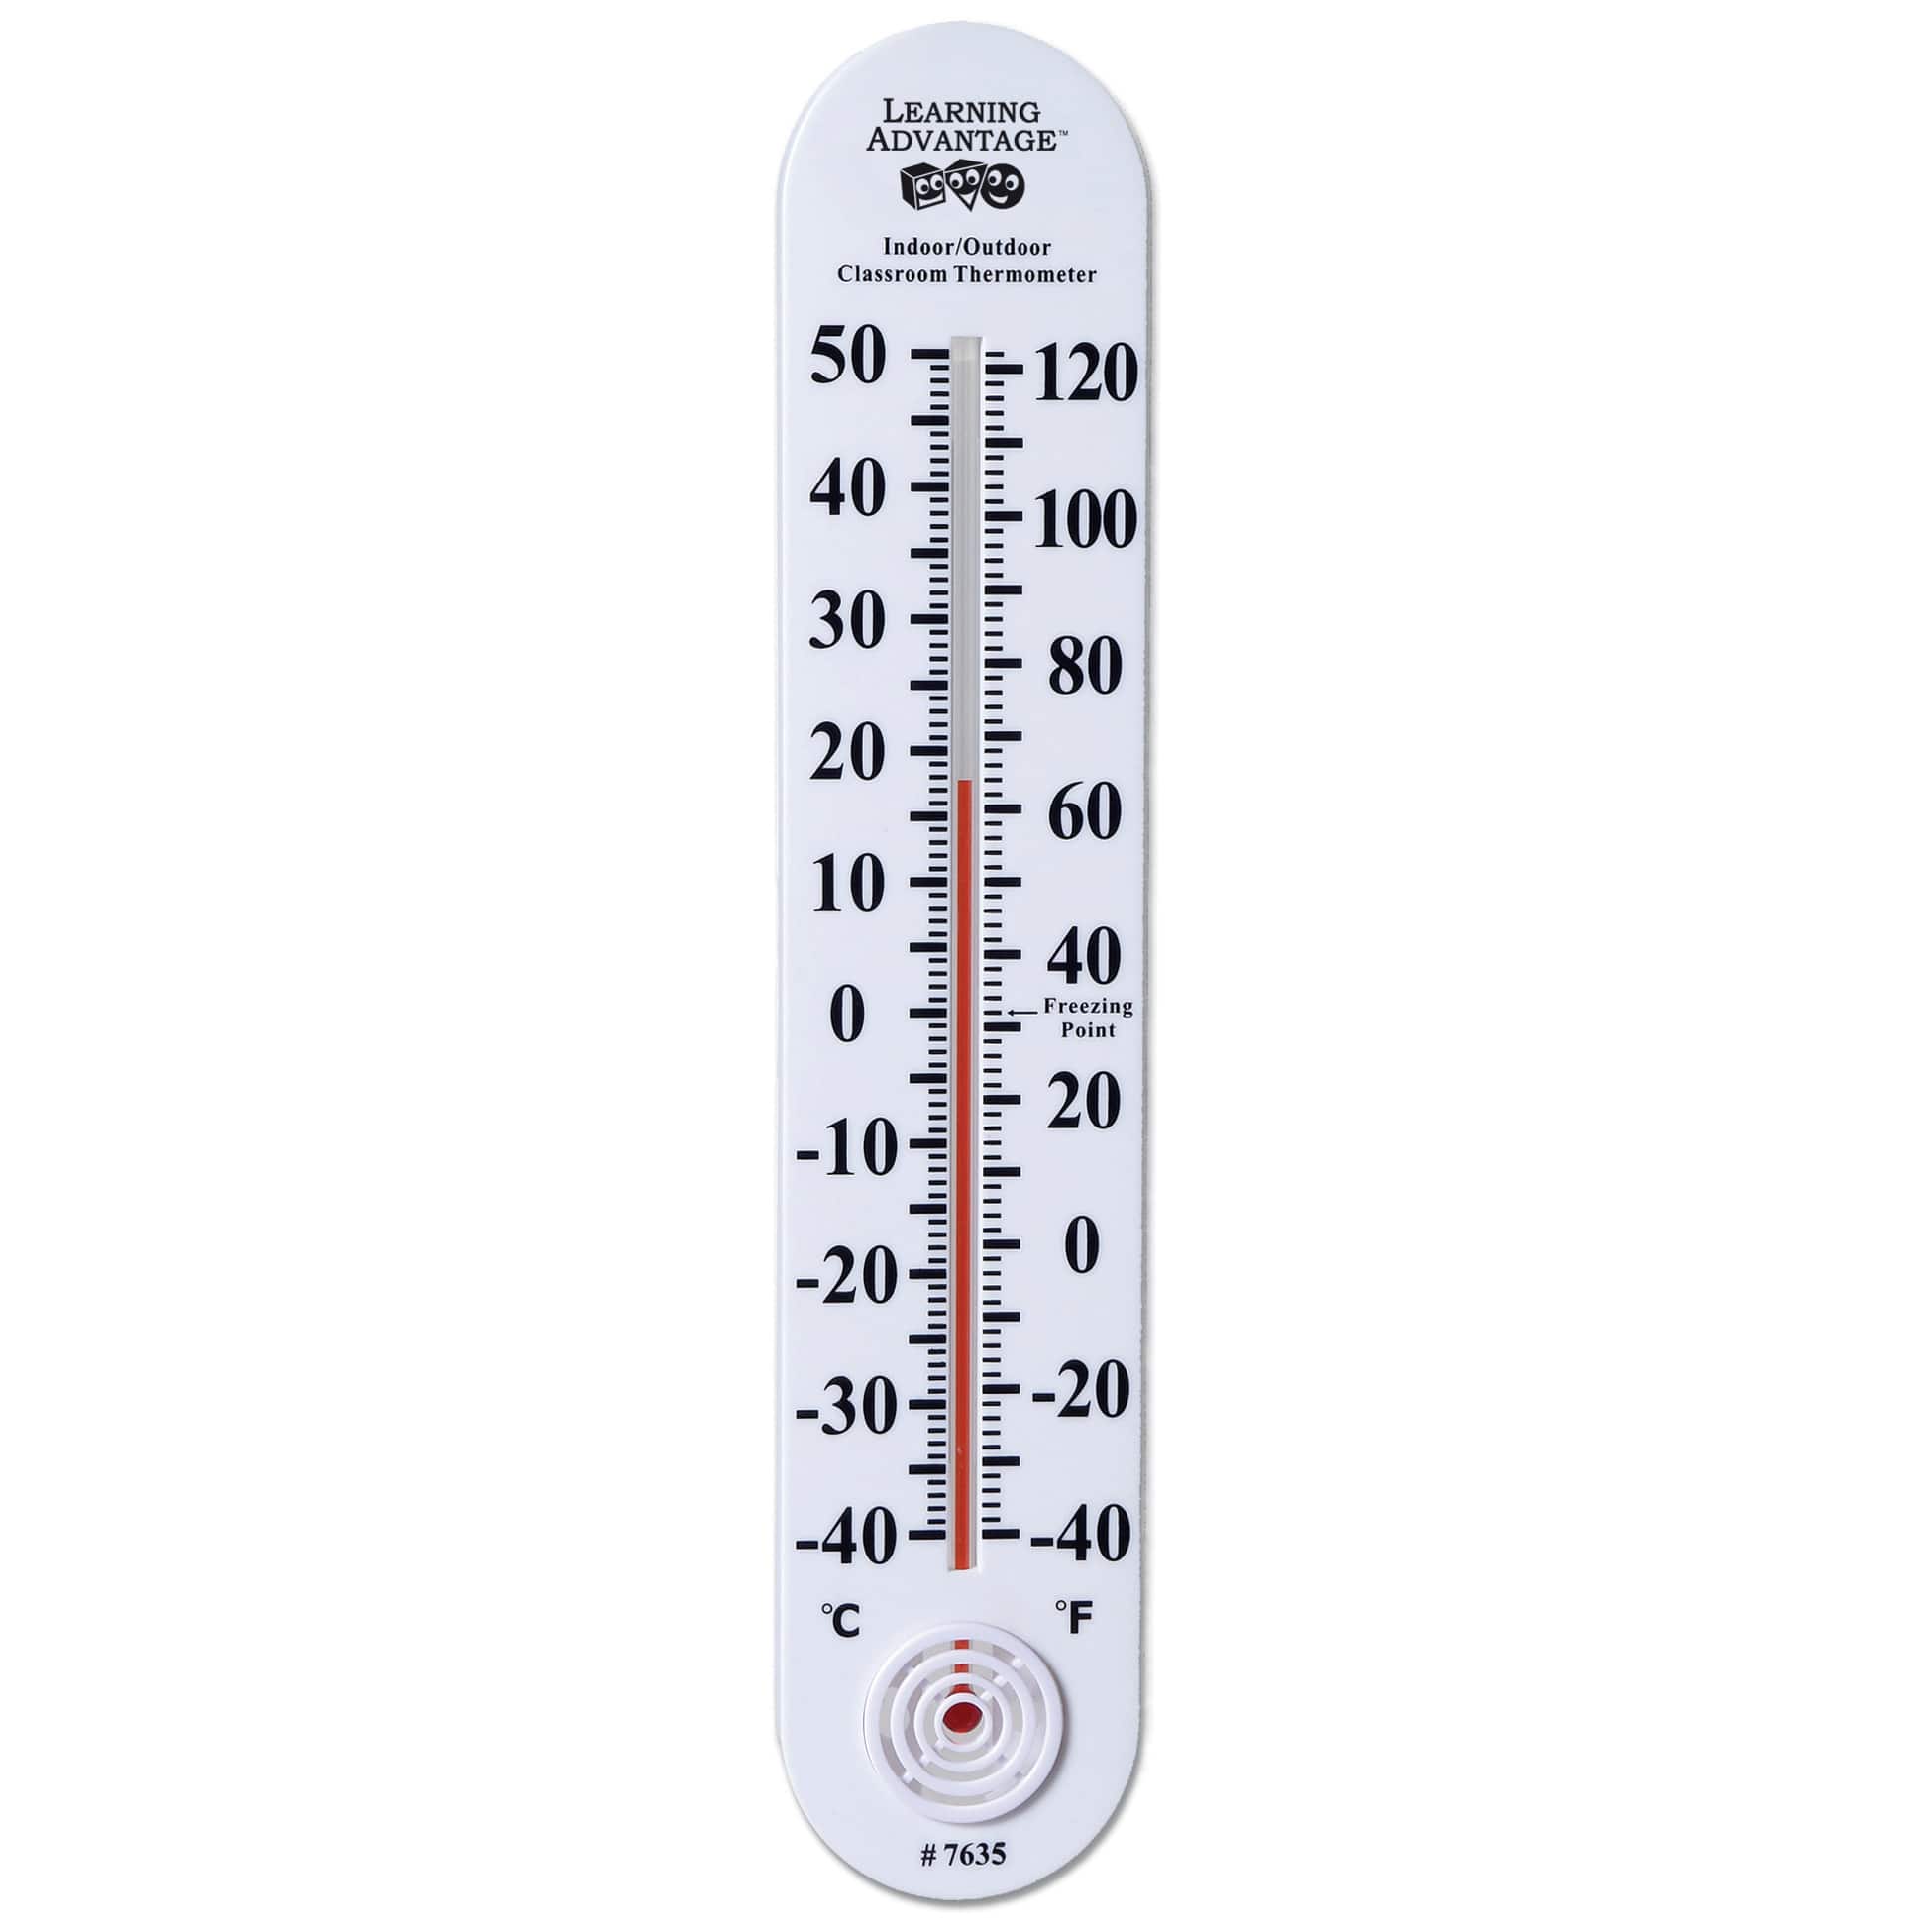 Learning Advantage&#x2122; Indoor / Outdoor Classroom Thermometer